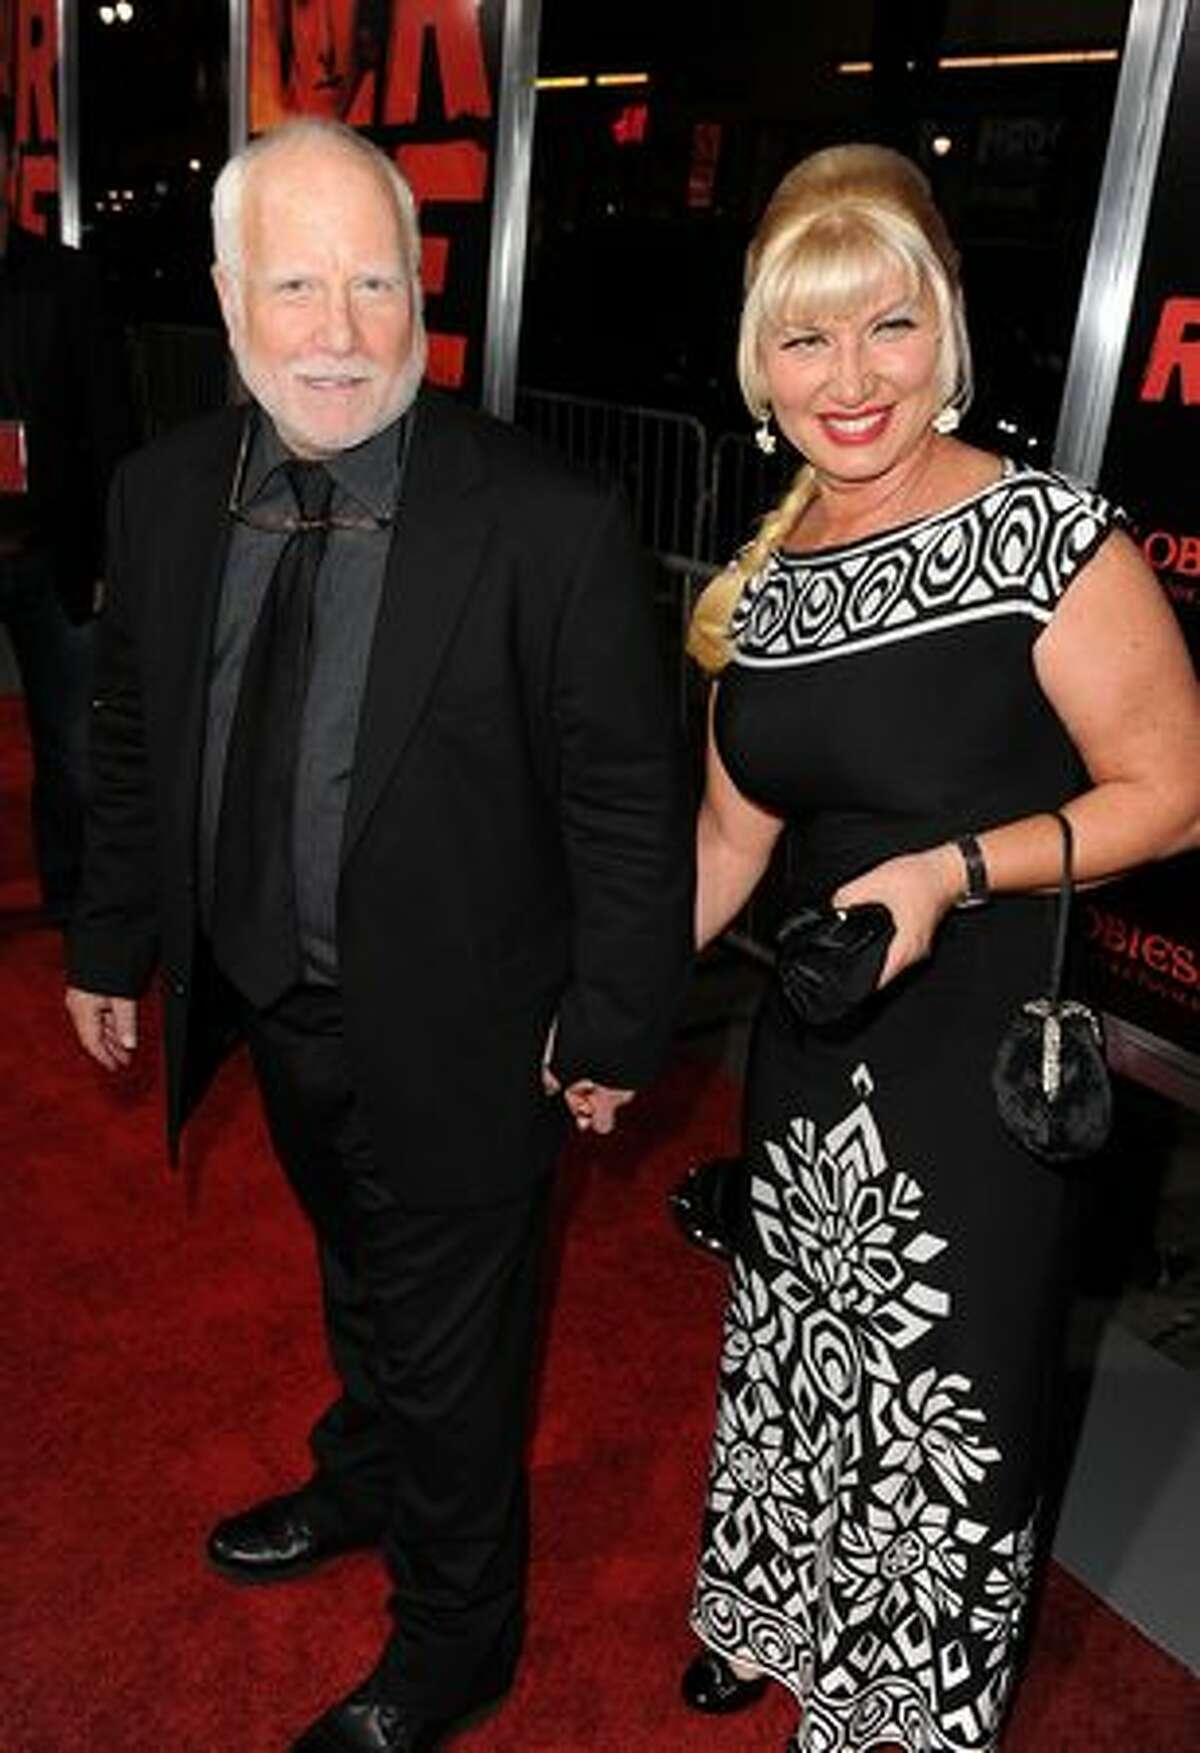 Actor Richard Dreyfuss and Svetlana Erokhin arrive at a special screening of Summit Entertainment's "RED" at Grauman's Chinese Theatre in Hollywood, California.